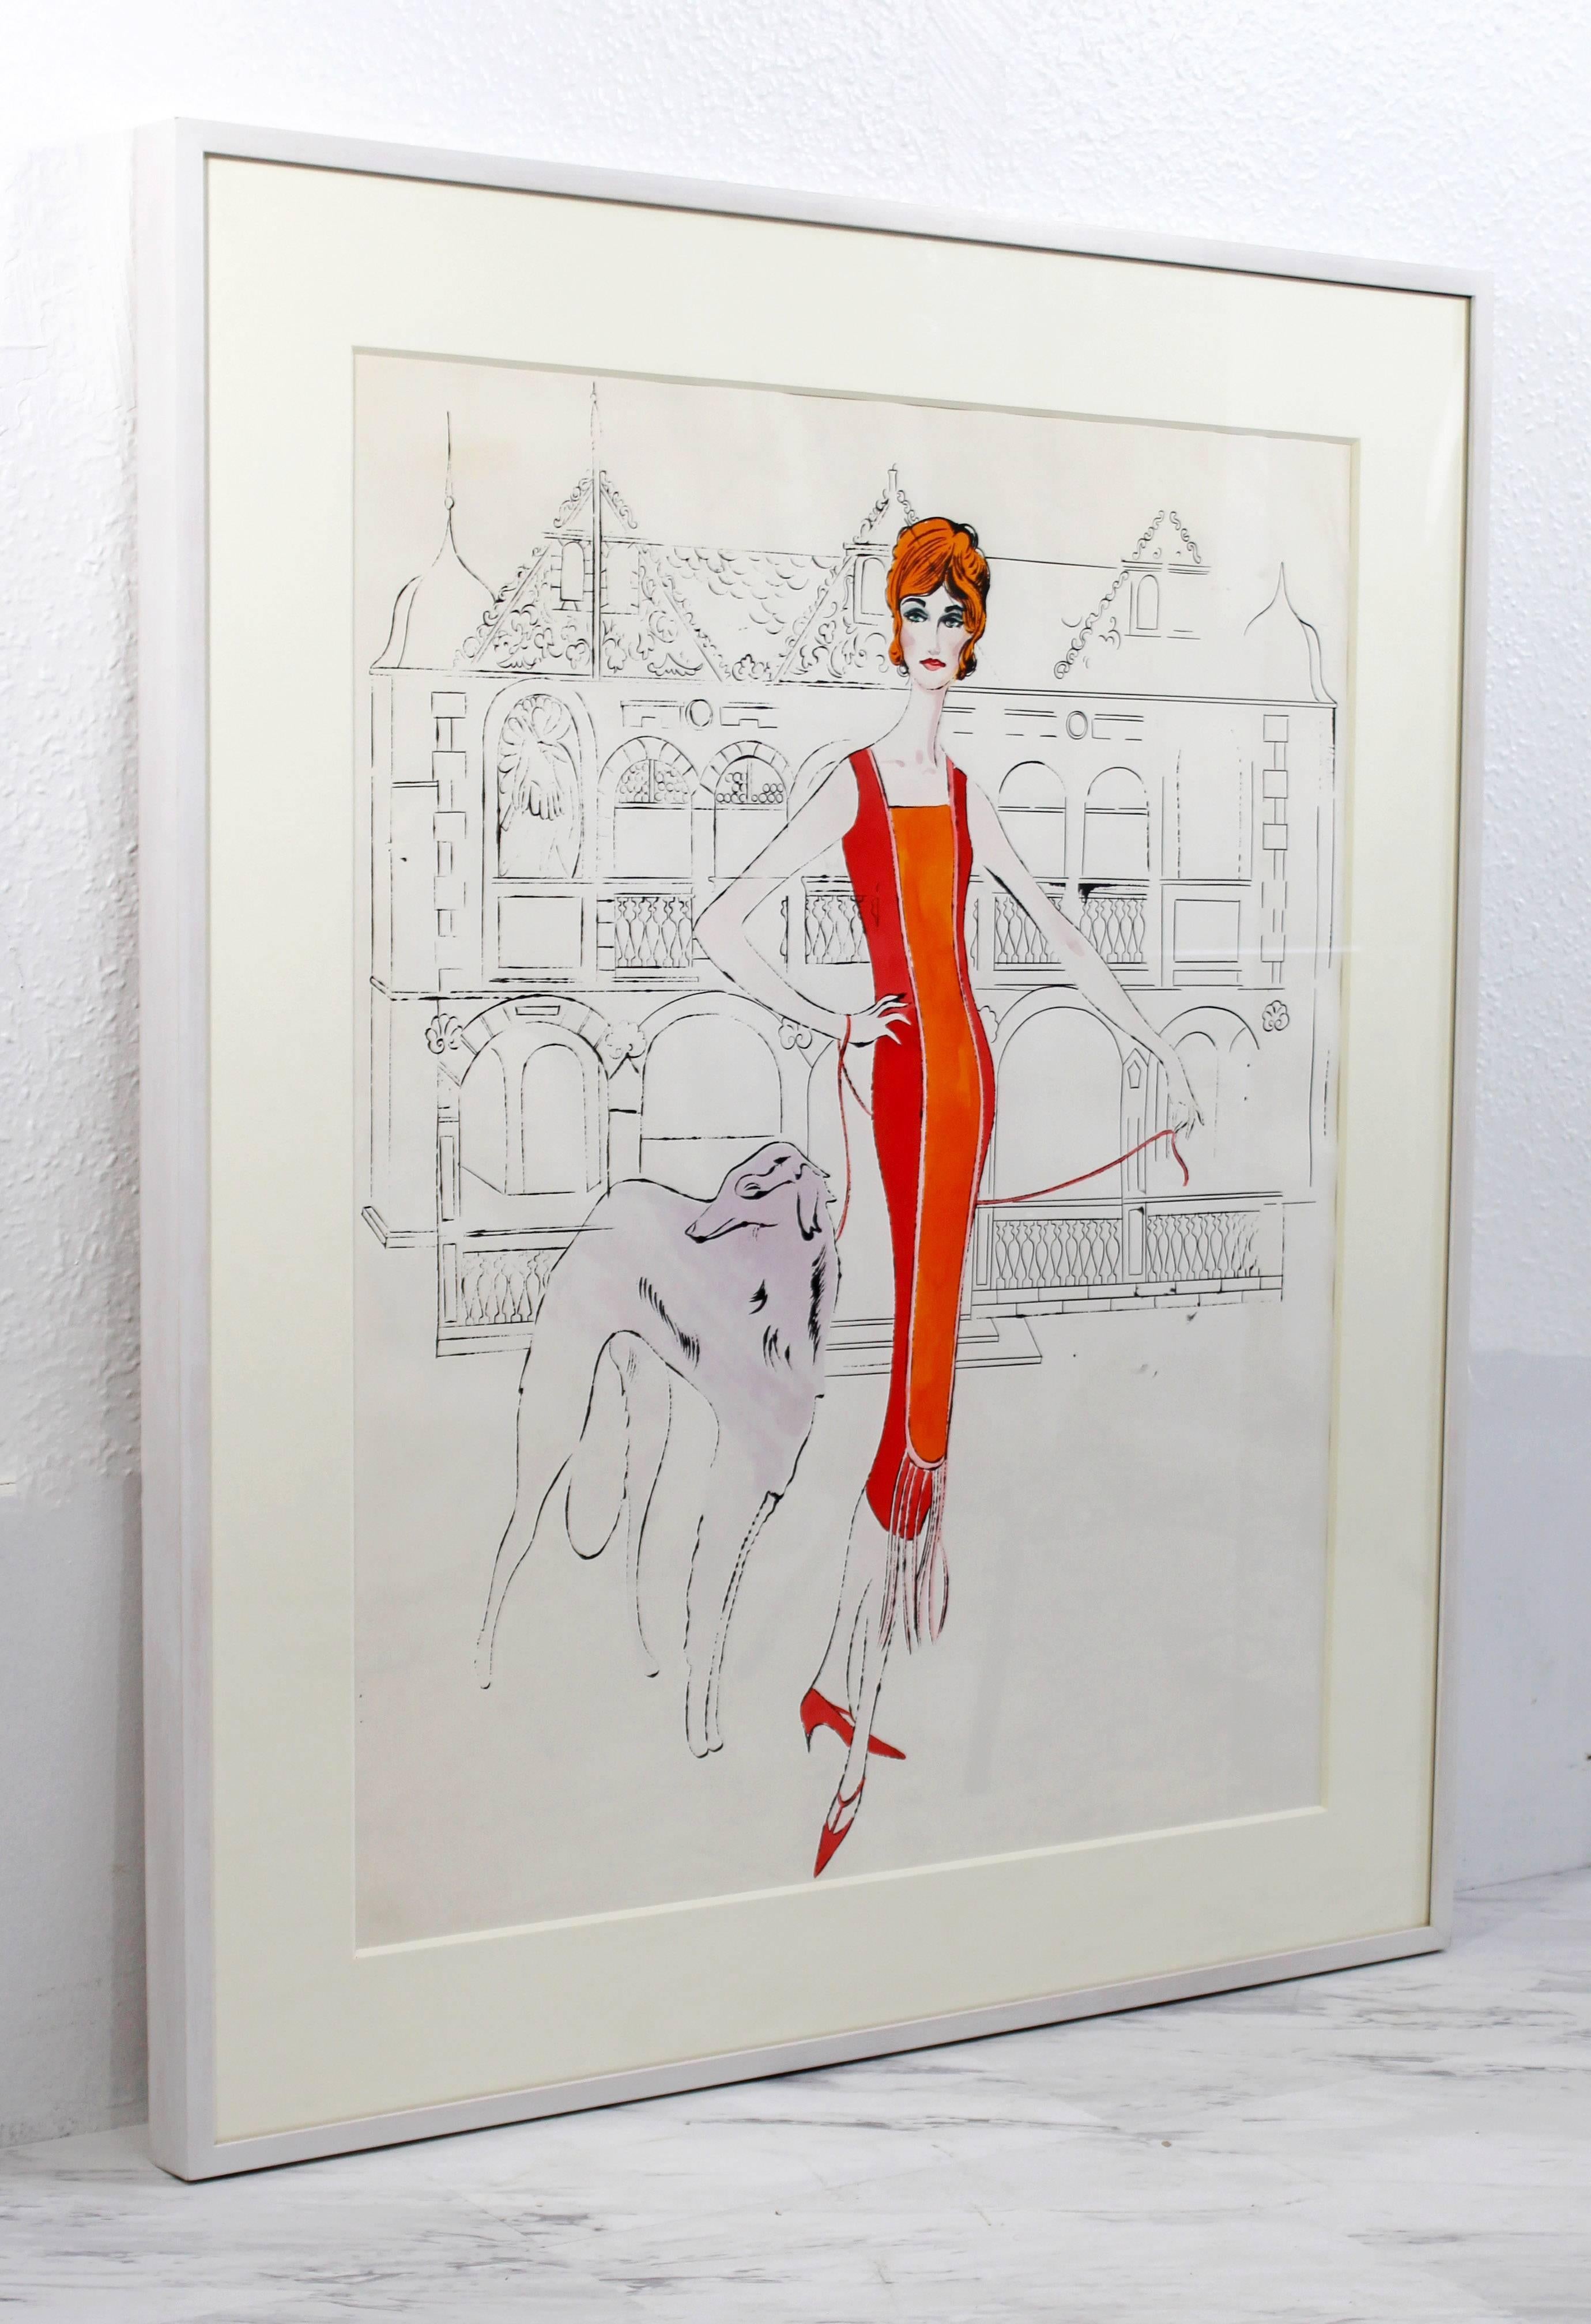 For your consideration is a stunning, original, ink drawing by Andy Warhol, entitled 